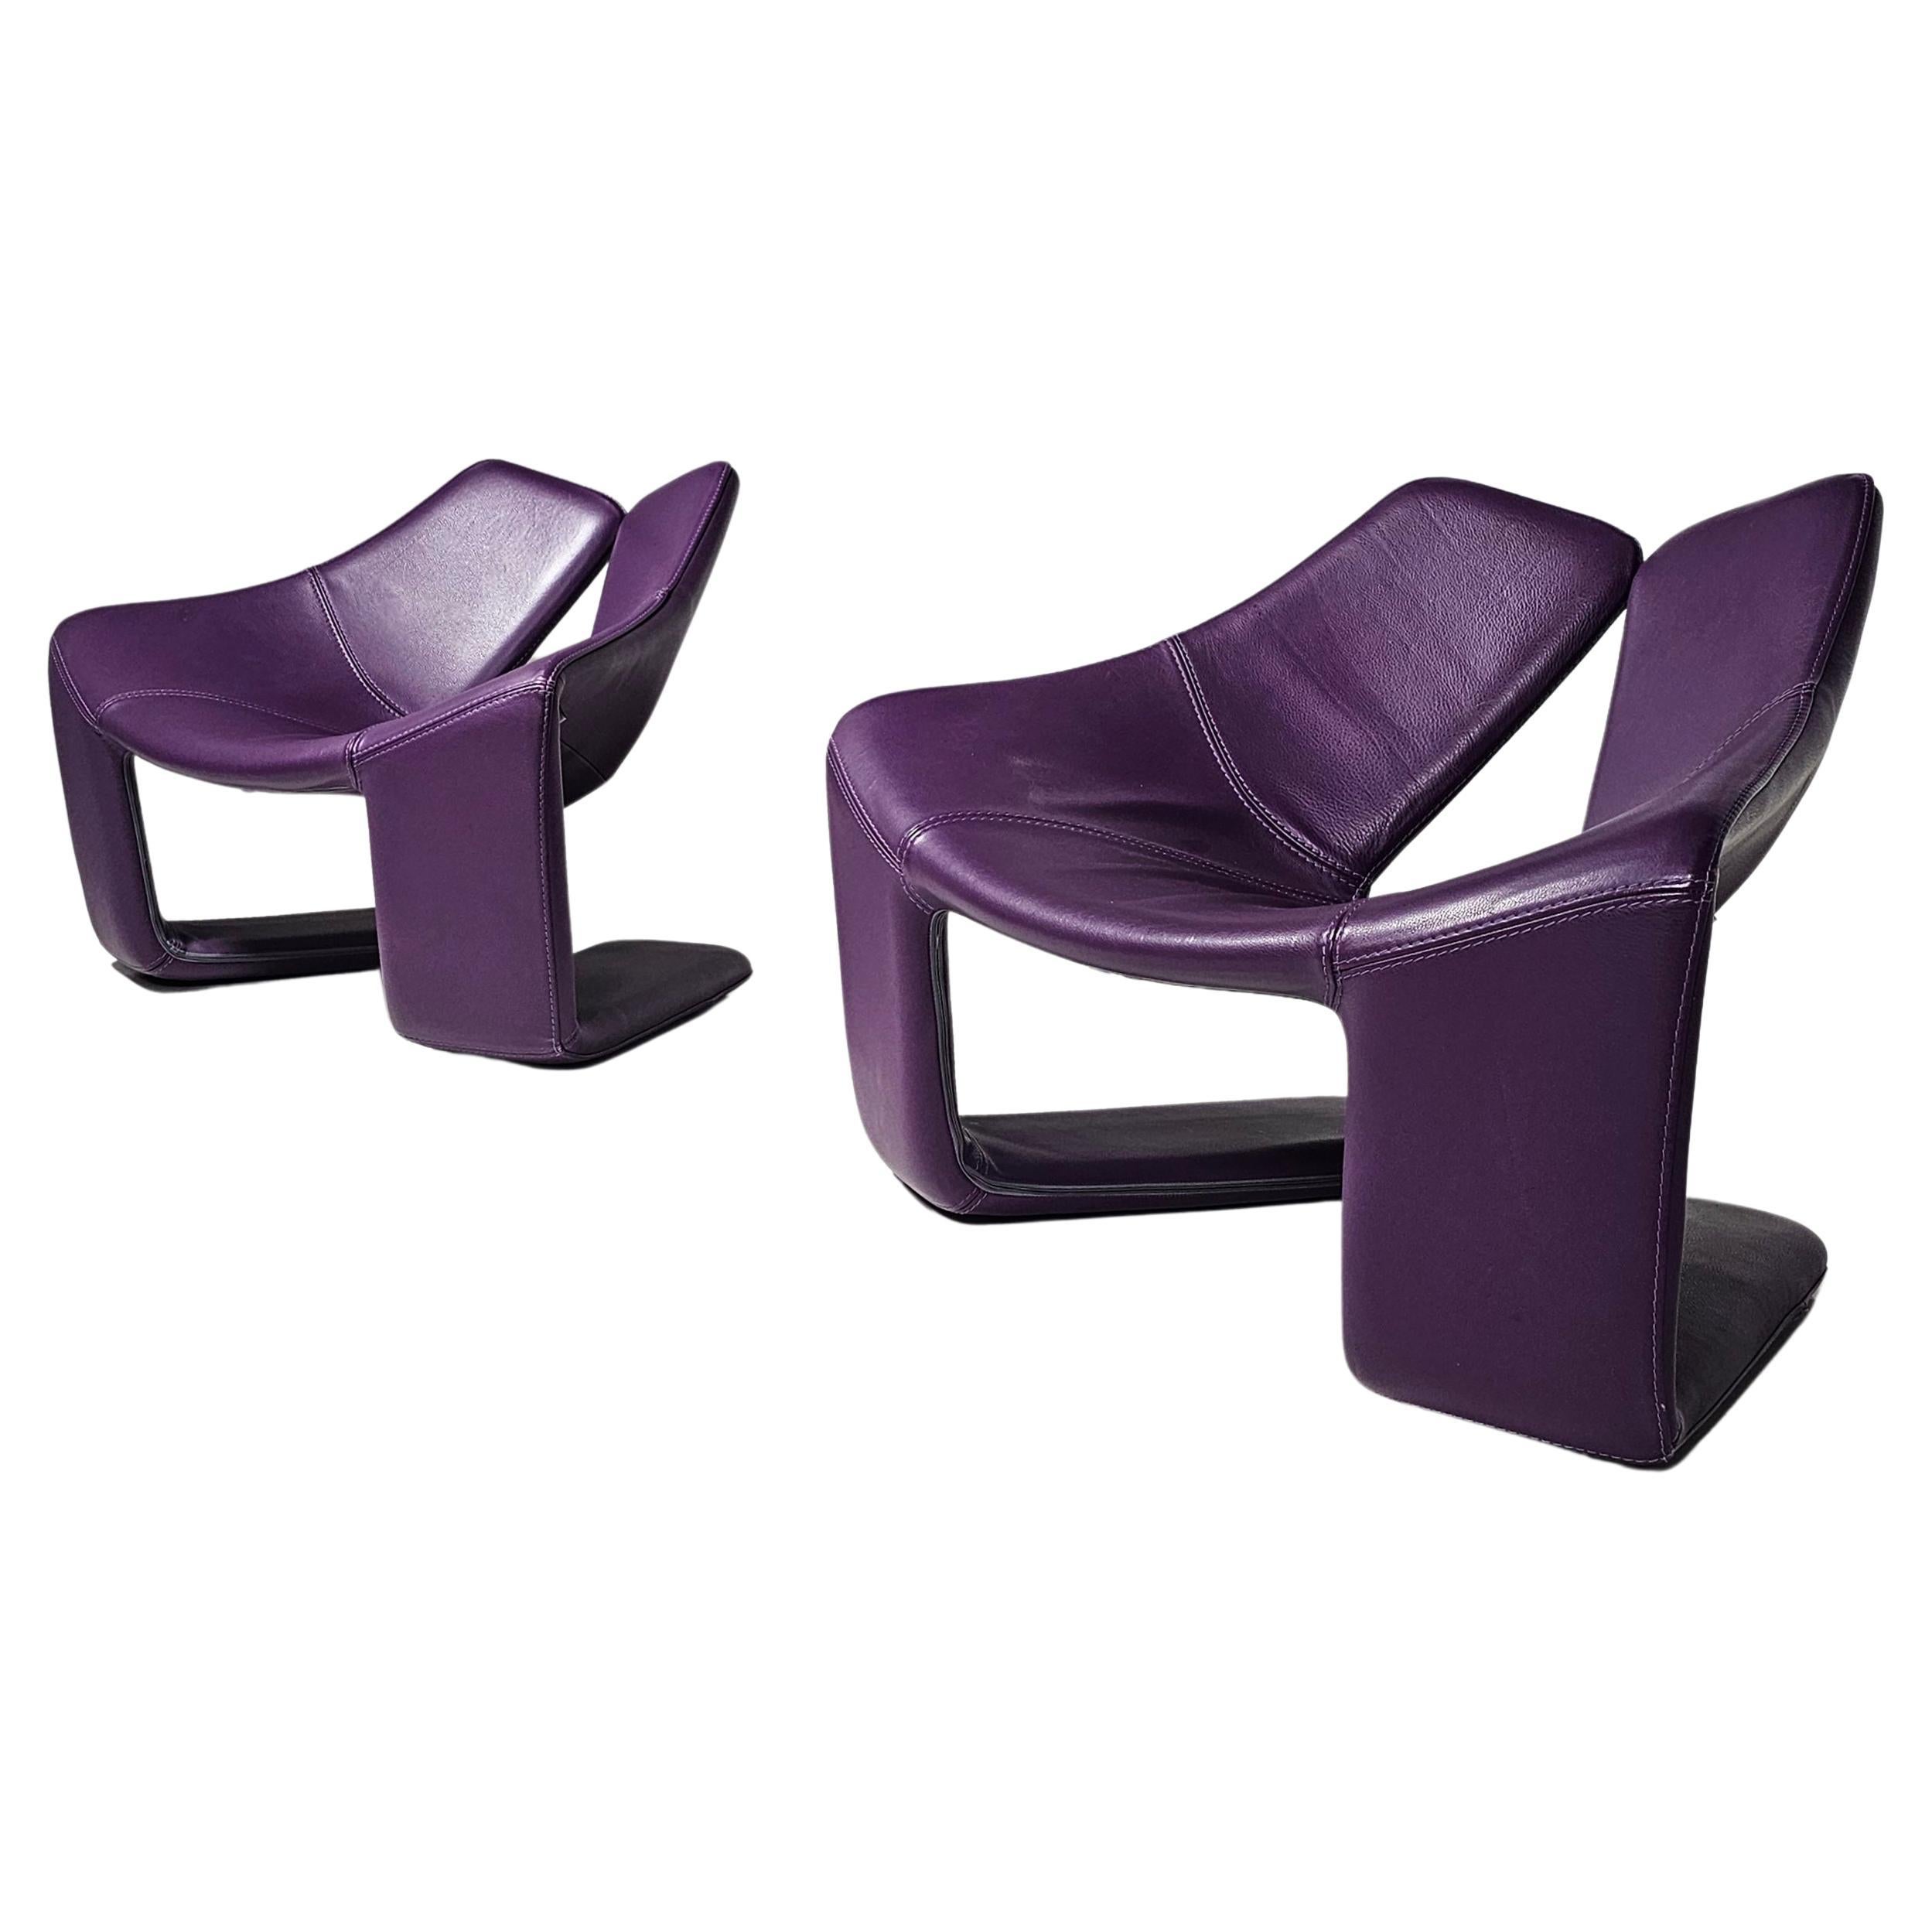 Pair of "Zen" lounge chairs in purple leather by Kwok Hoi Chan for Steiner, 1970